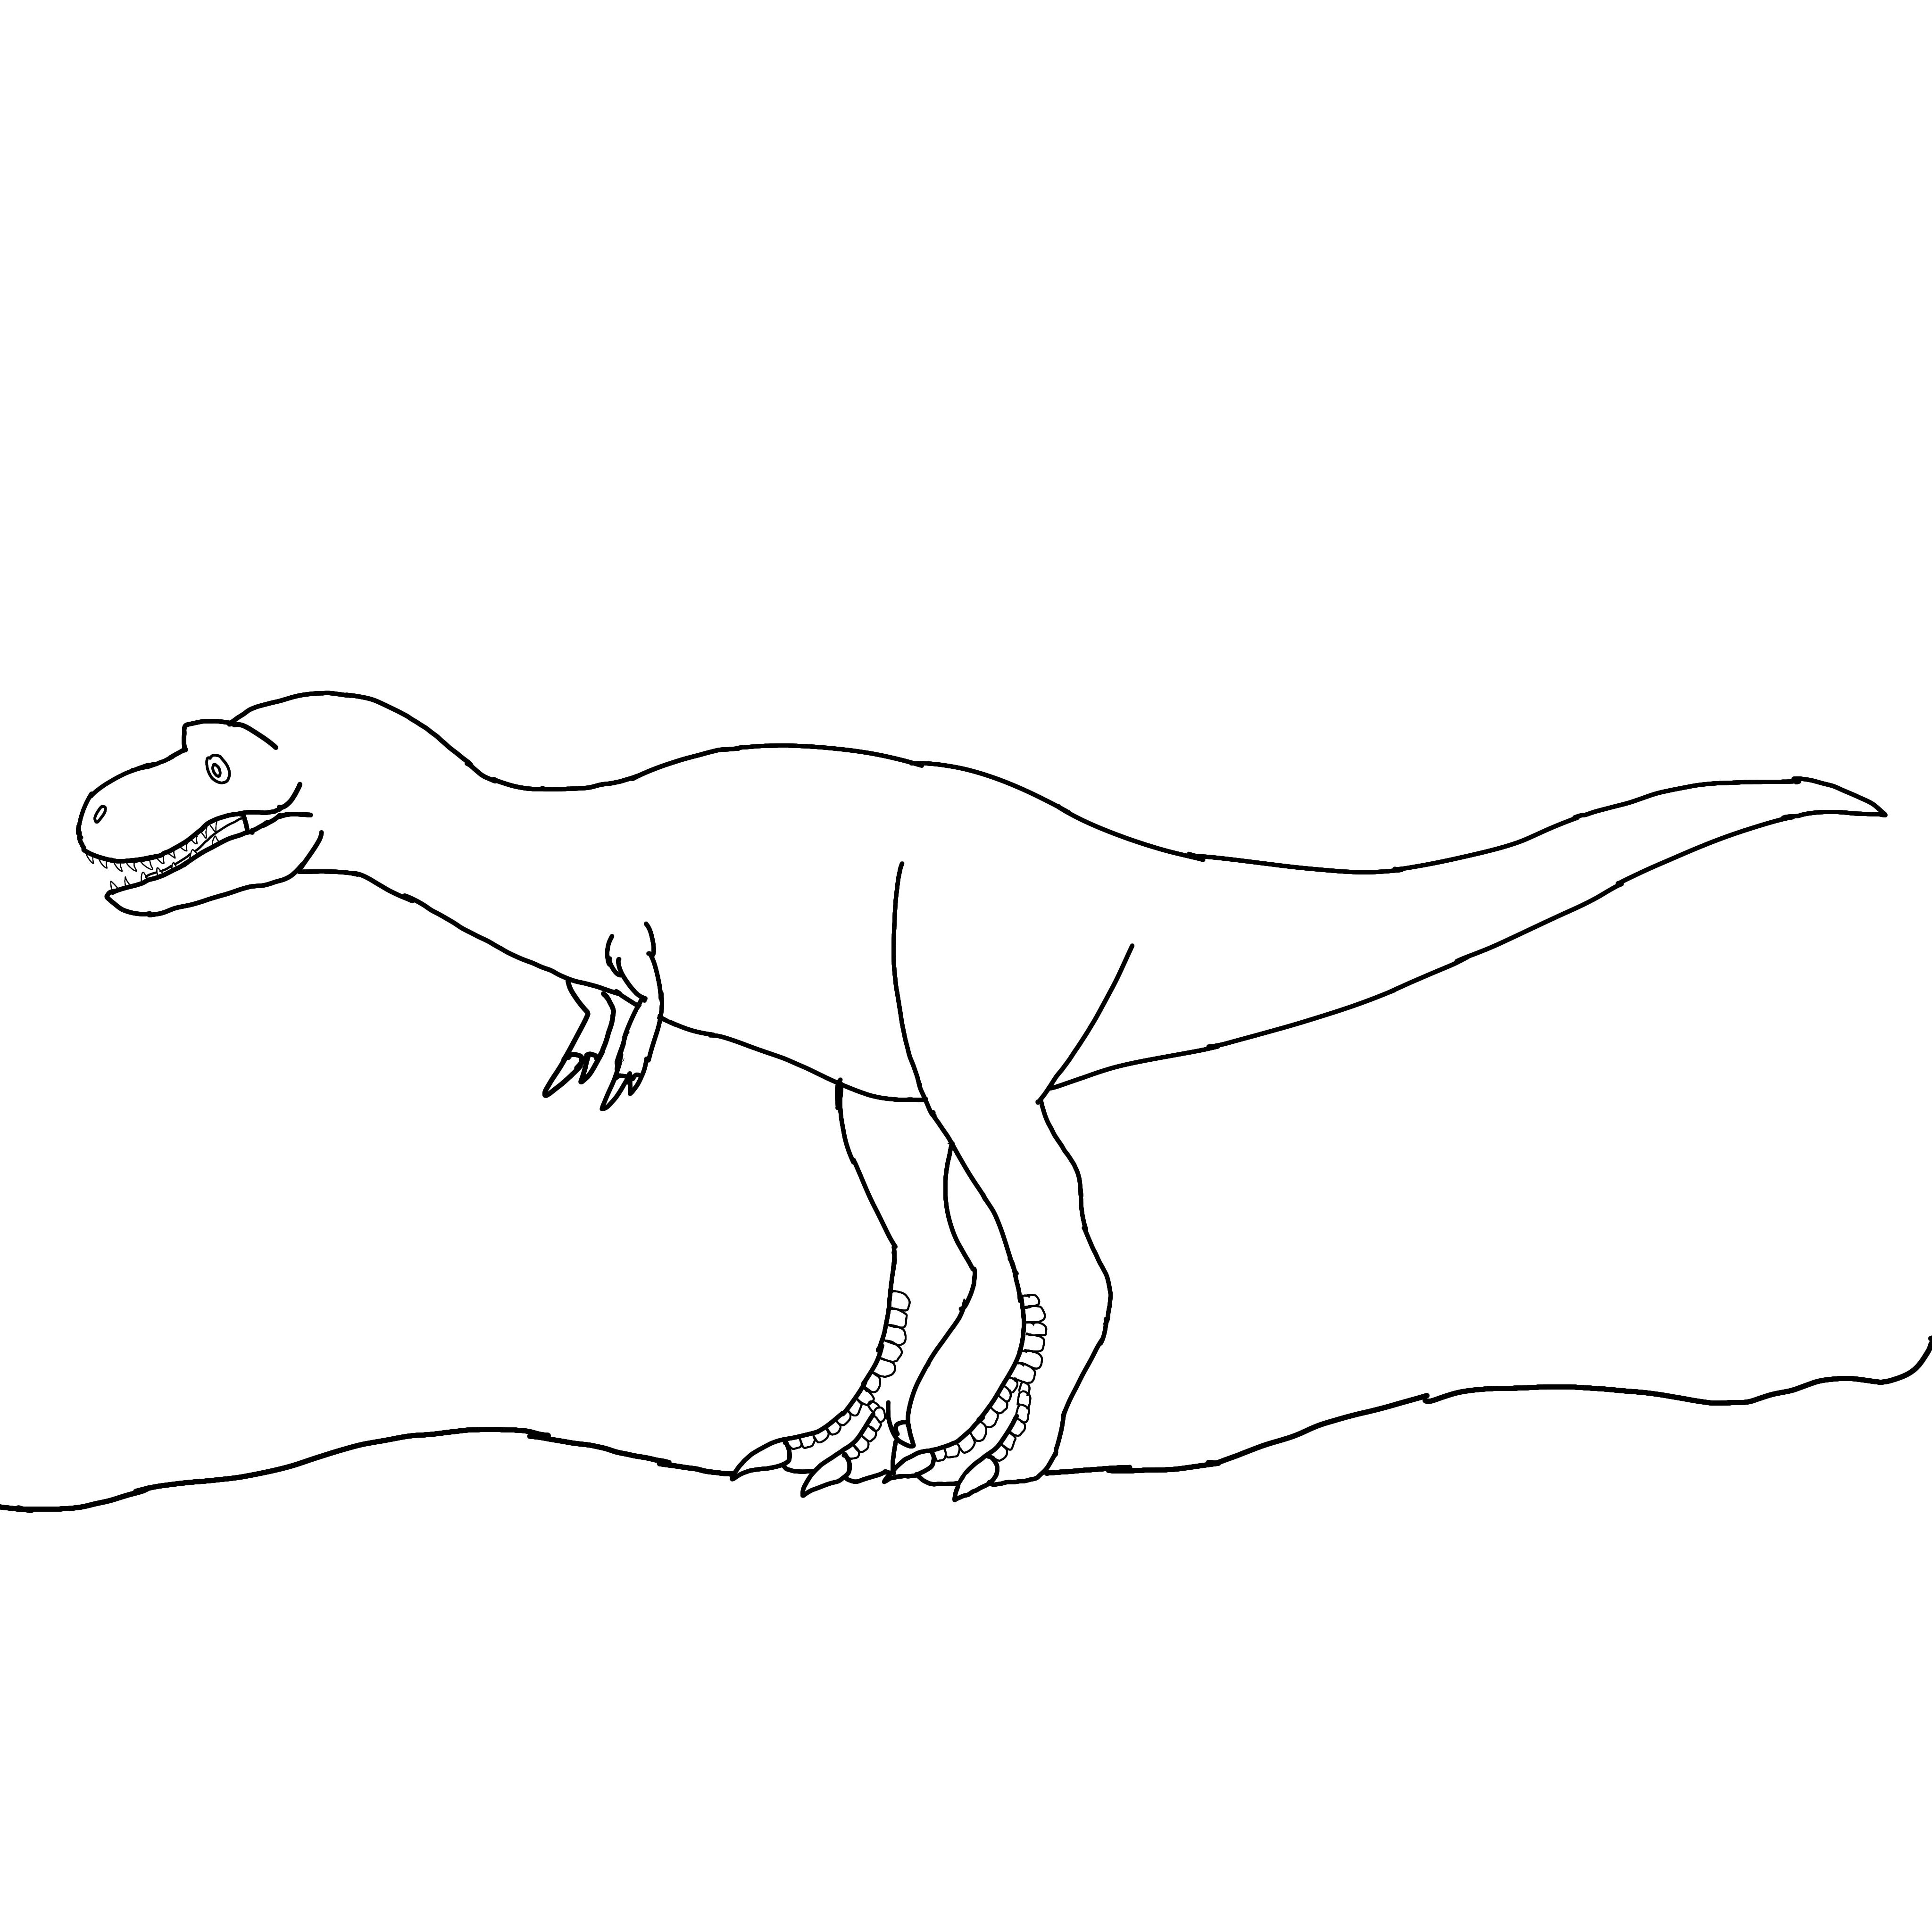 Made an albertosaurus coloring page (free for any use) : r/DinosaurDrawings